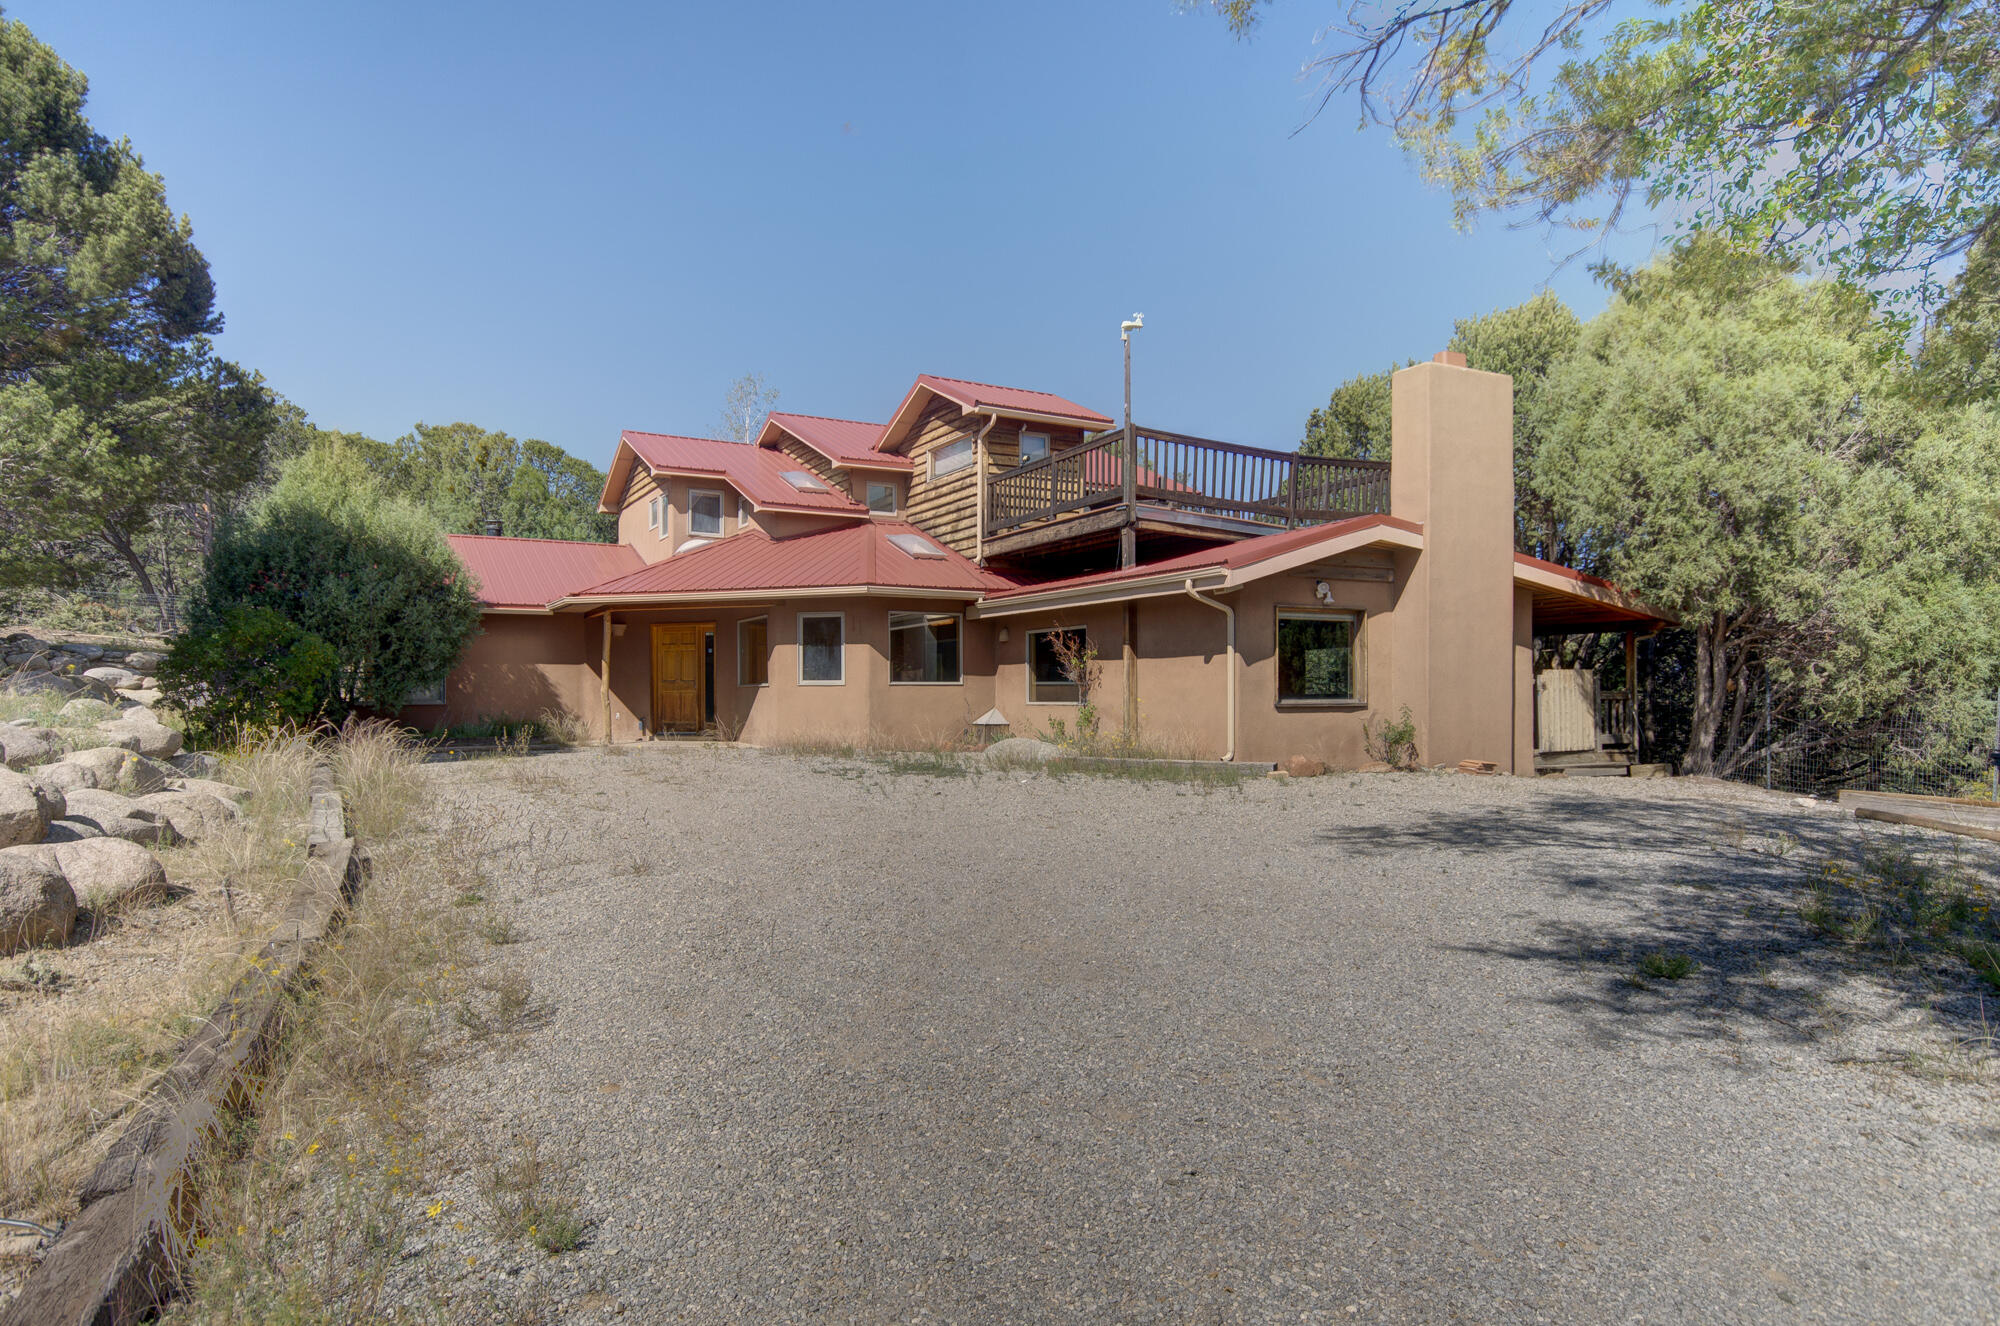 This spacious home is situated in a cozy wooded area with beautiful views of Cedro Peak. With large rooms and beautiful views, this home has endless potential. Unique Southwestern elements give this home character.